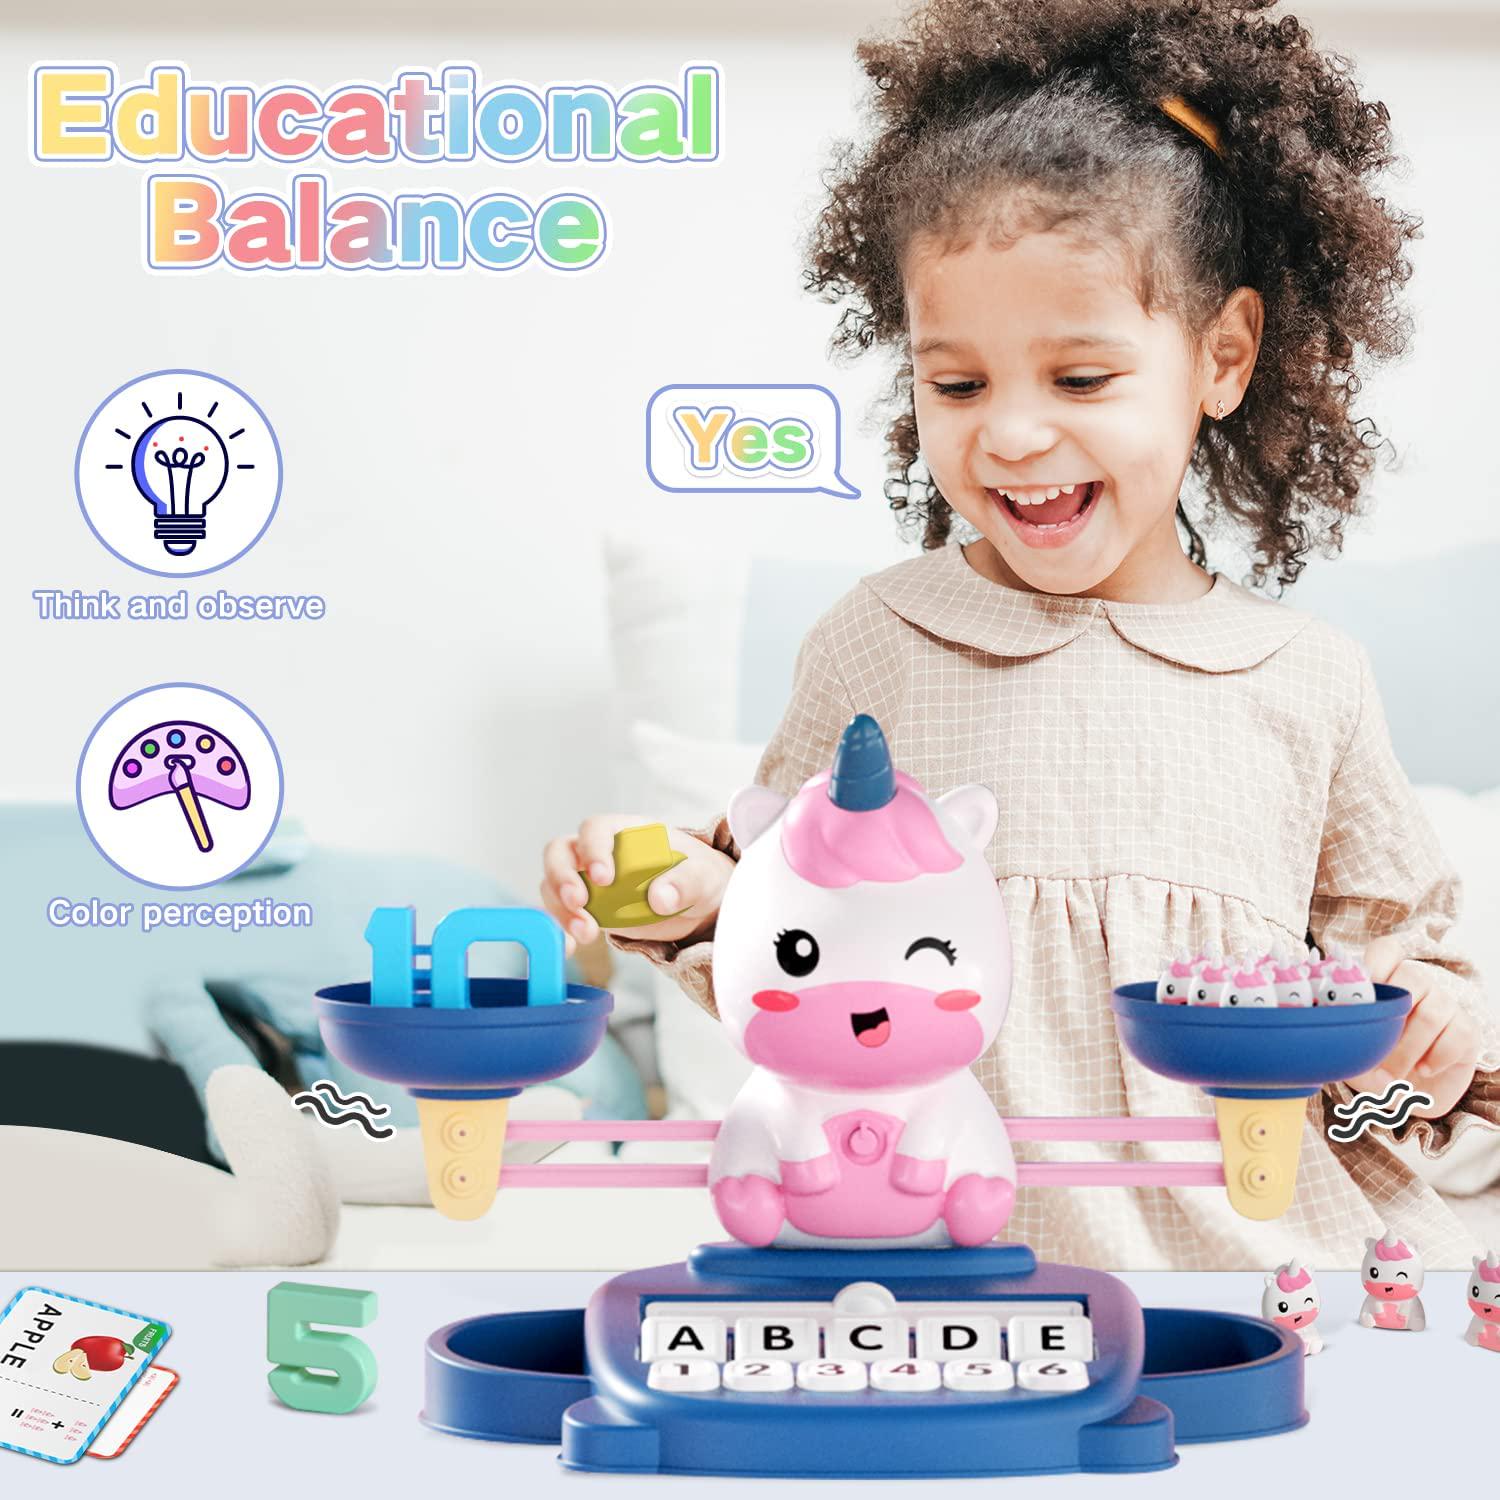 HopeEye, Educational Toys for 3 Year Old Girls Boys - Unicorns Gifts for Girls Matching Letter Game and Balance Cool Math Games for Kids Toys Ages 3-8 Christmas Birthday Toddler Gifts for 3 4 5 Year Olds Girls